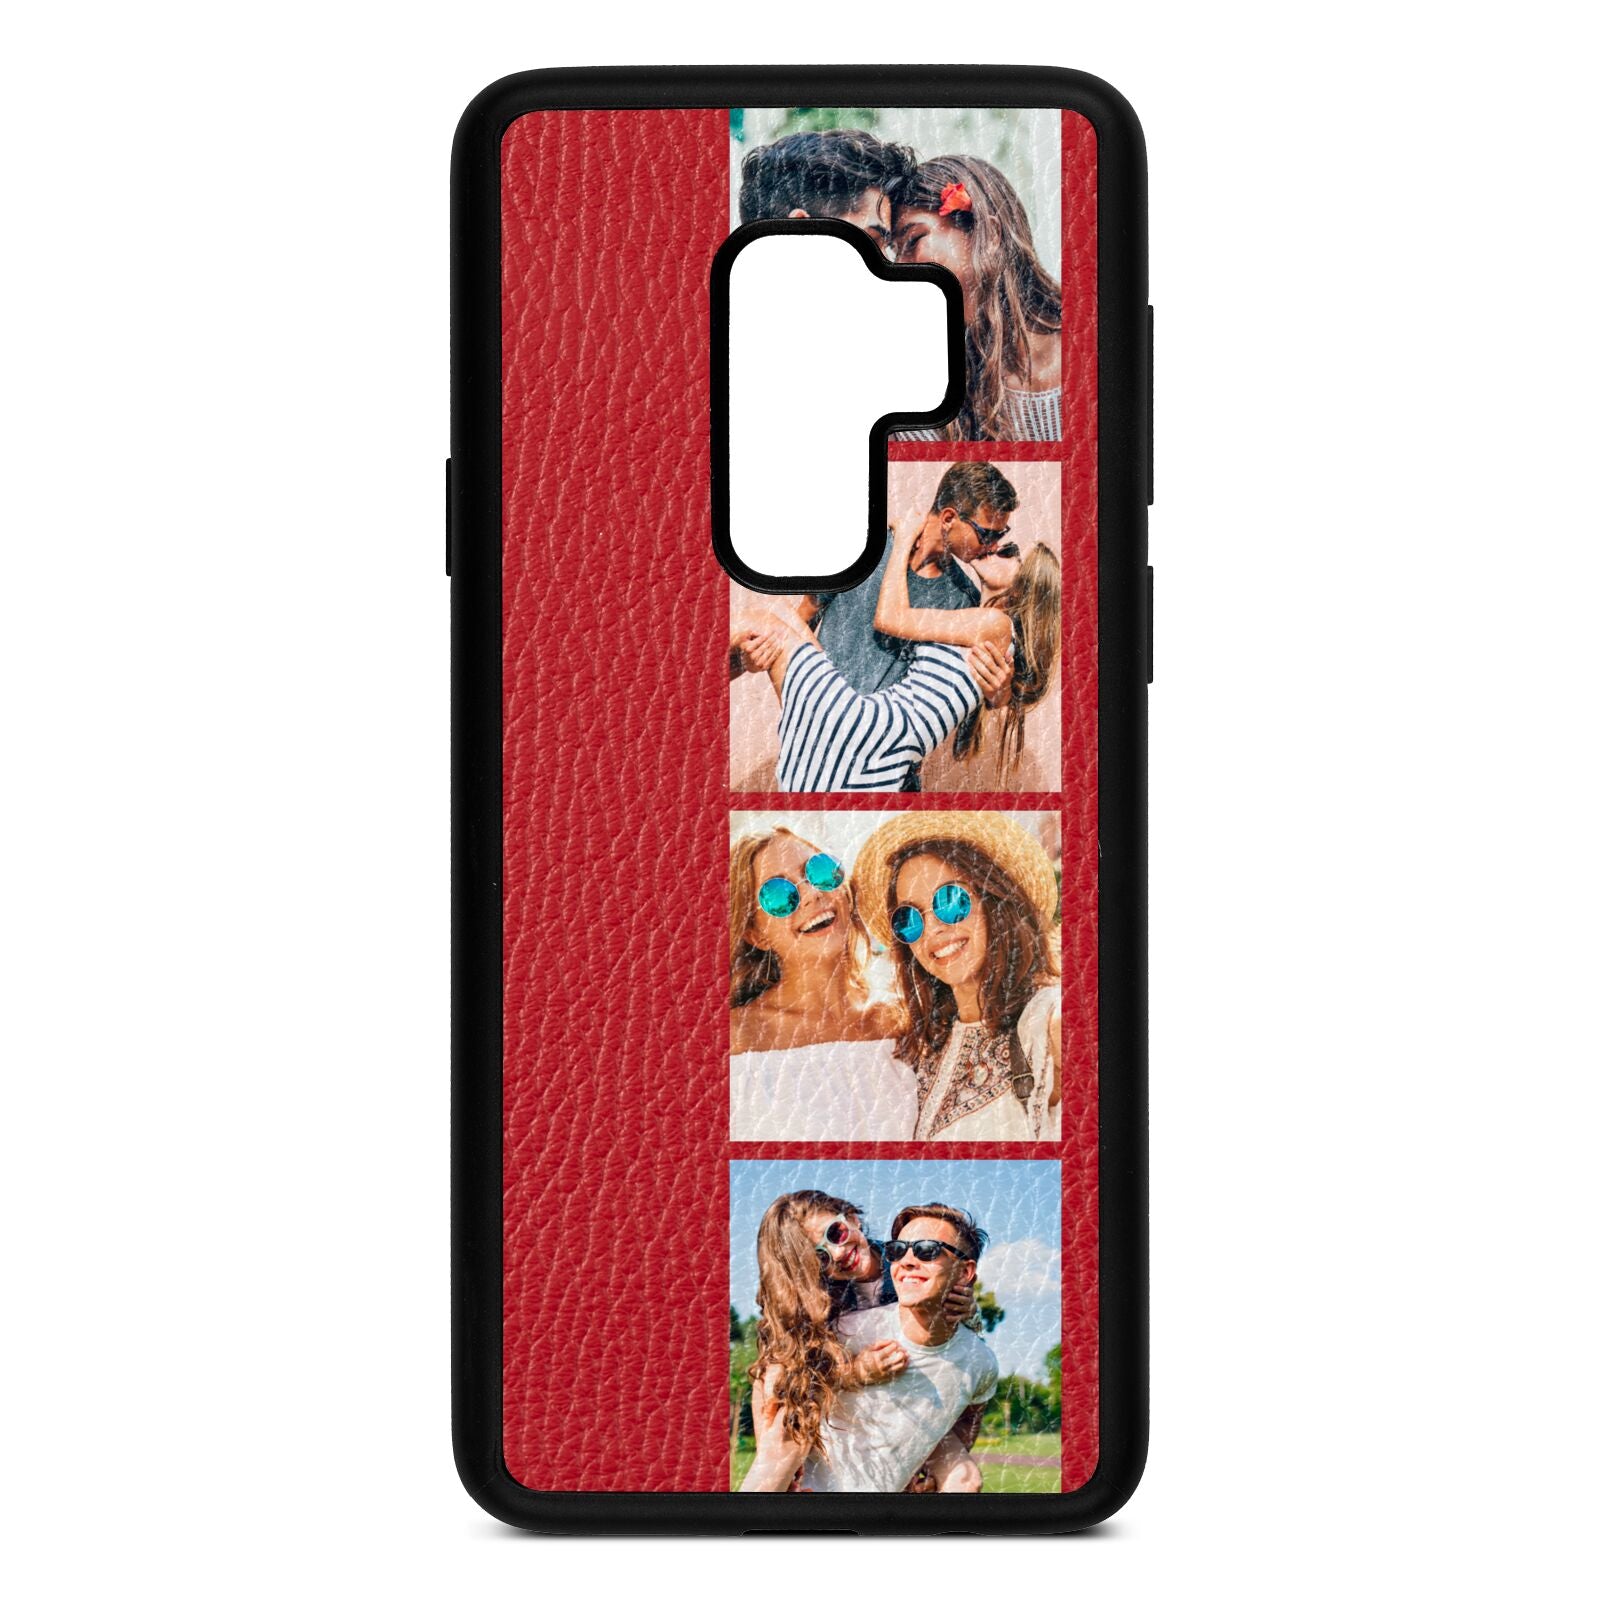 Photo Strip Montage Upload Red Pebble Leather Samsung S9 Plus Case